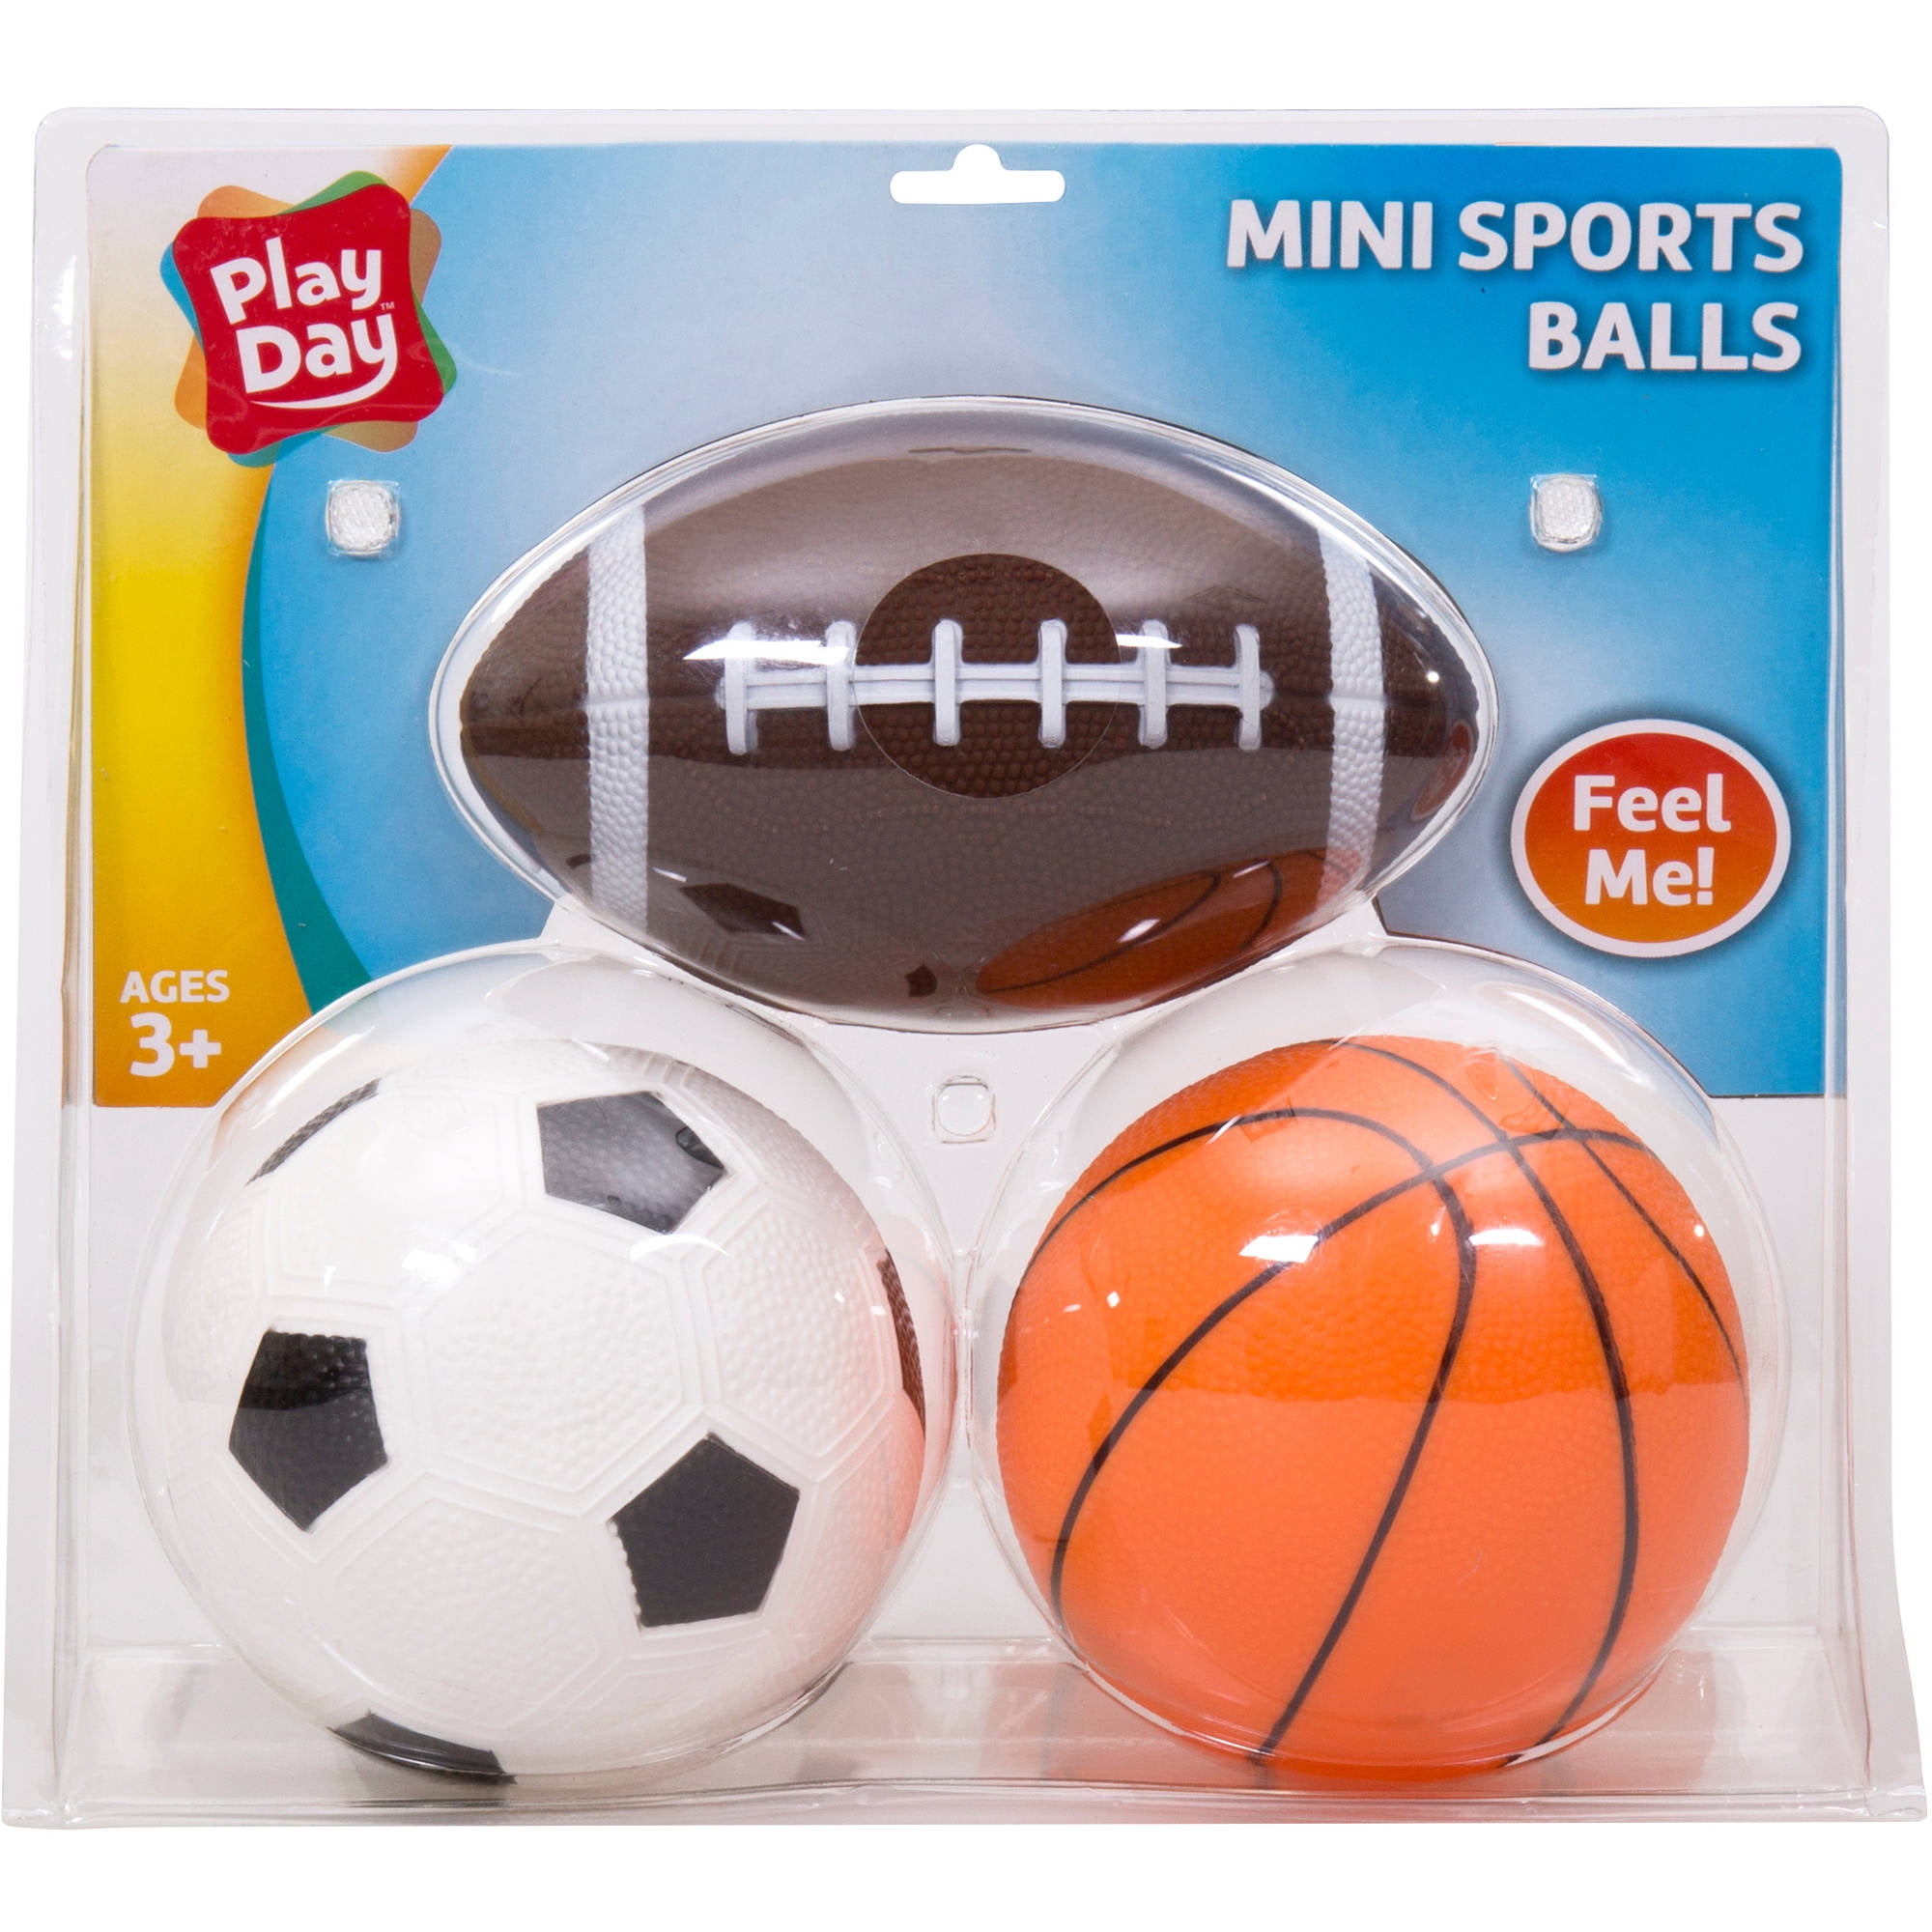 All-Star Sports Mini Soft Foam Football Safe Healthy Activities For Kids 3 F/S 